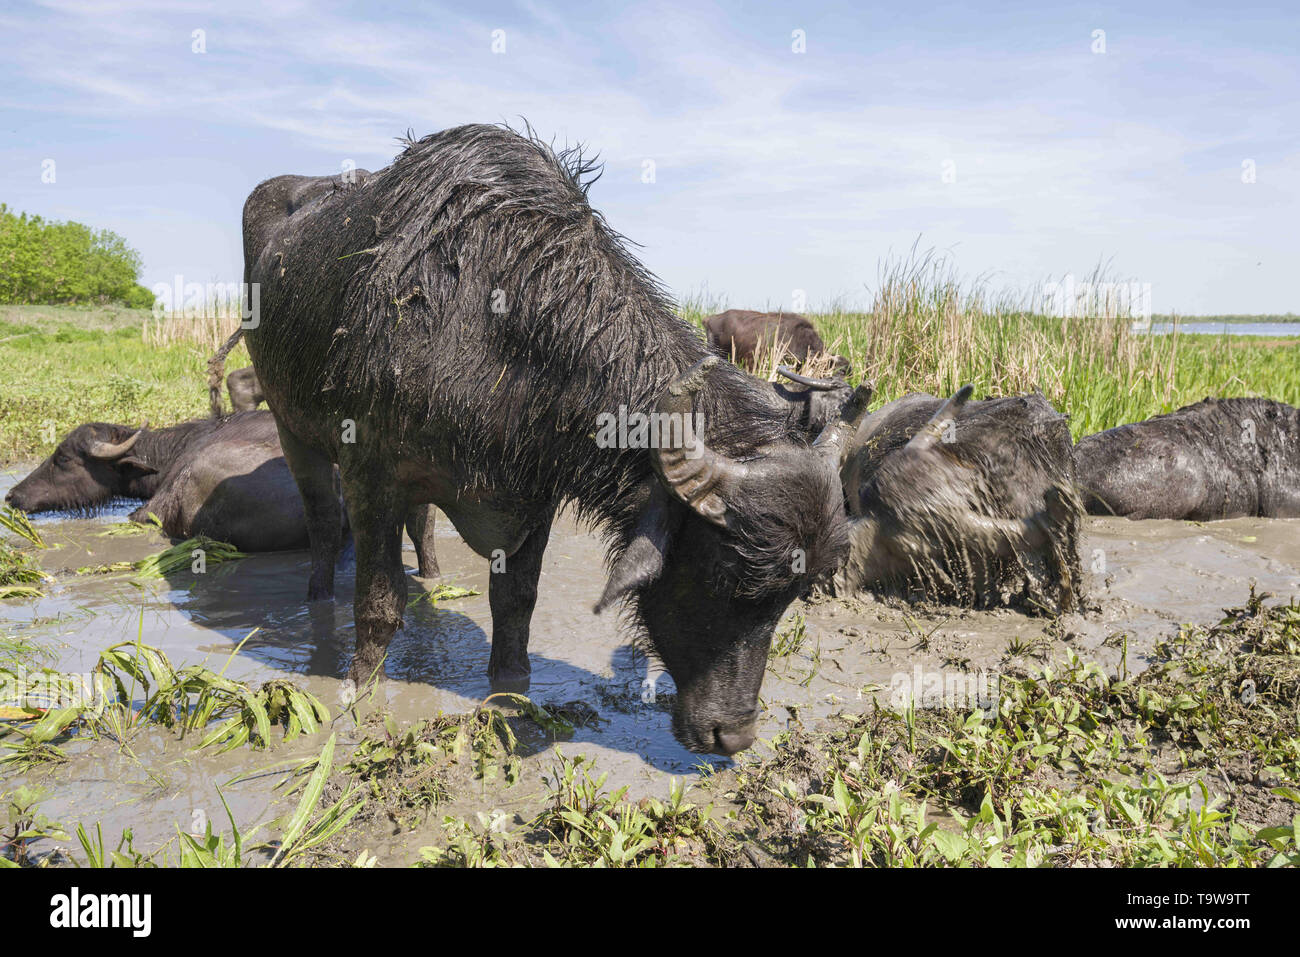 Ermakov Island, Vilkovsky Distri, Ukraine, Eastern Europe. 20th May, 2019. The herd of 7 water buffaloes was released on Ermakov Island in the Ukrainian Danube delta. The animals were brought from Transcarpathia by 'Rewilding Ukraine'' to help preserve the island's mosaic landscapes and rich biodiversity. Credit: Andrey Nekrasov/ZUMA Wire/Alamy Live News Stock Photo